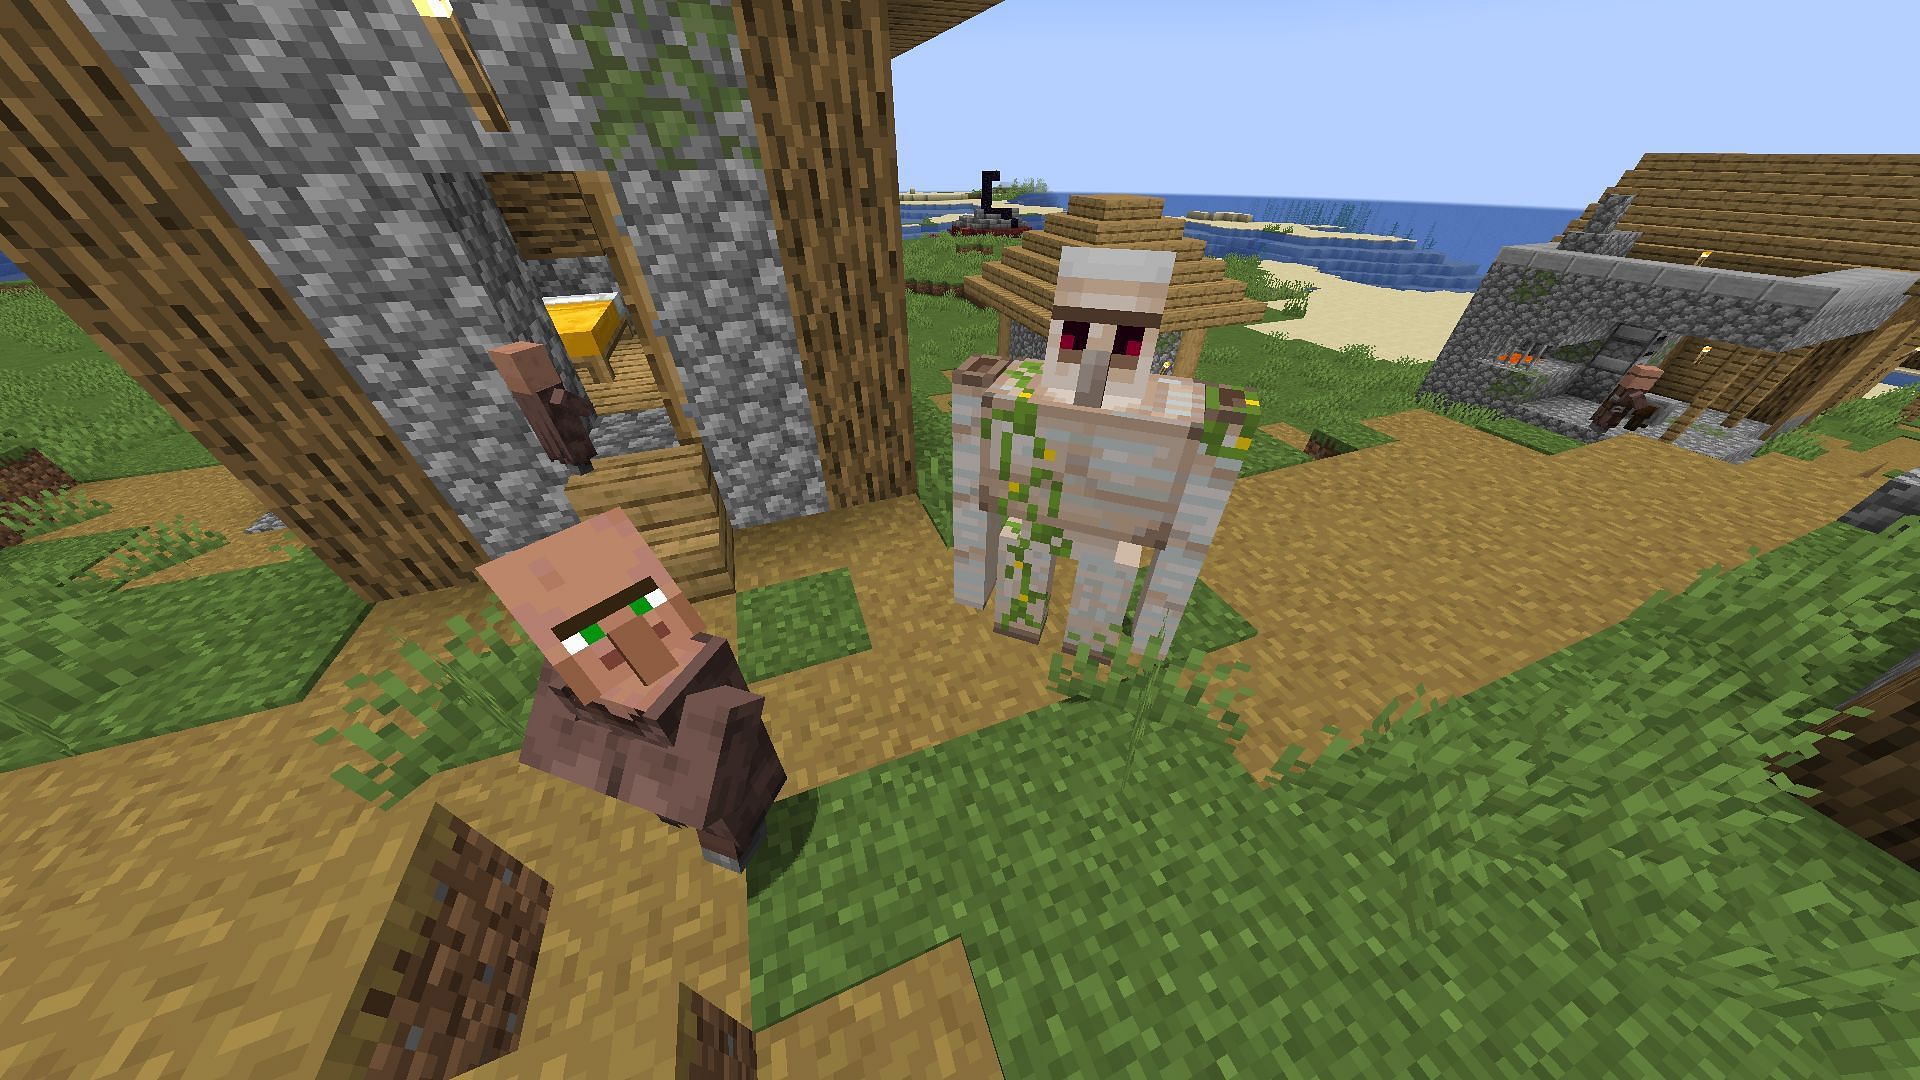 Villagers can make infinite iron golems in Minecraft (Image via Mojang)